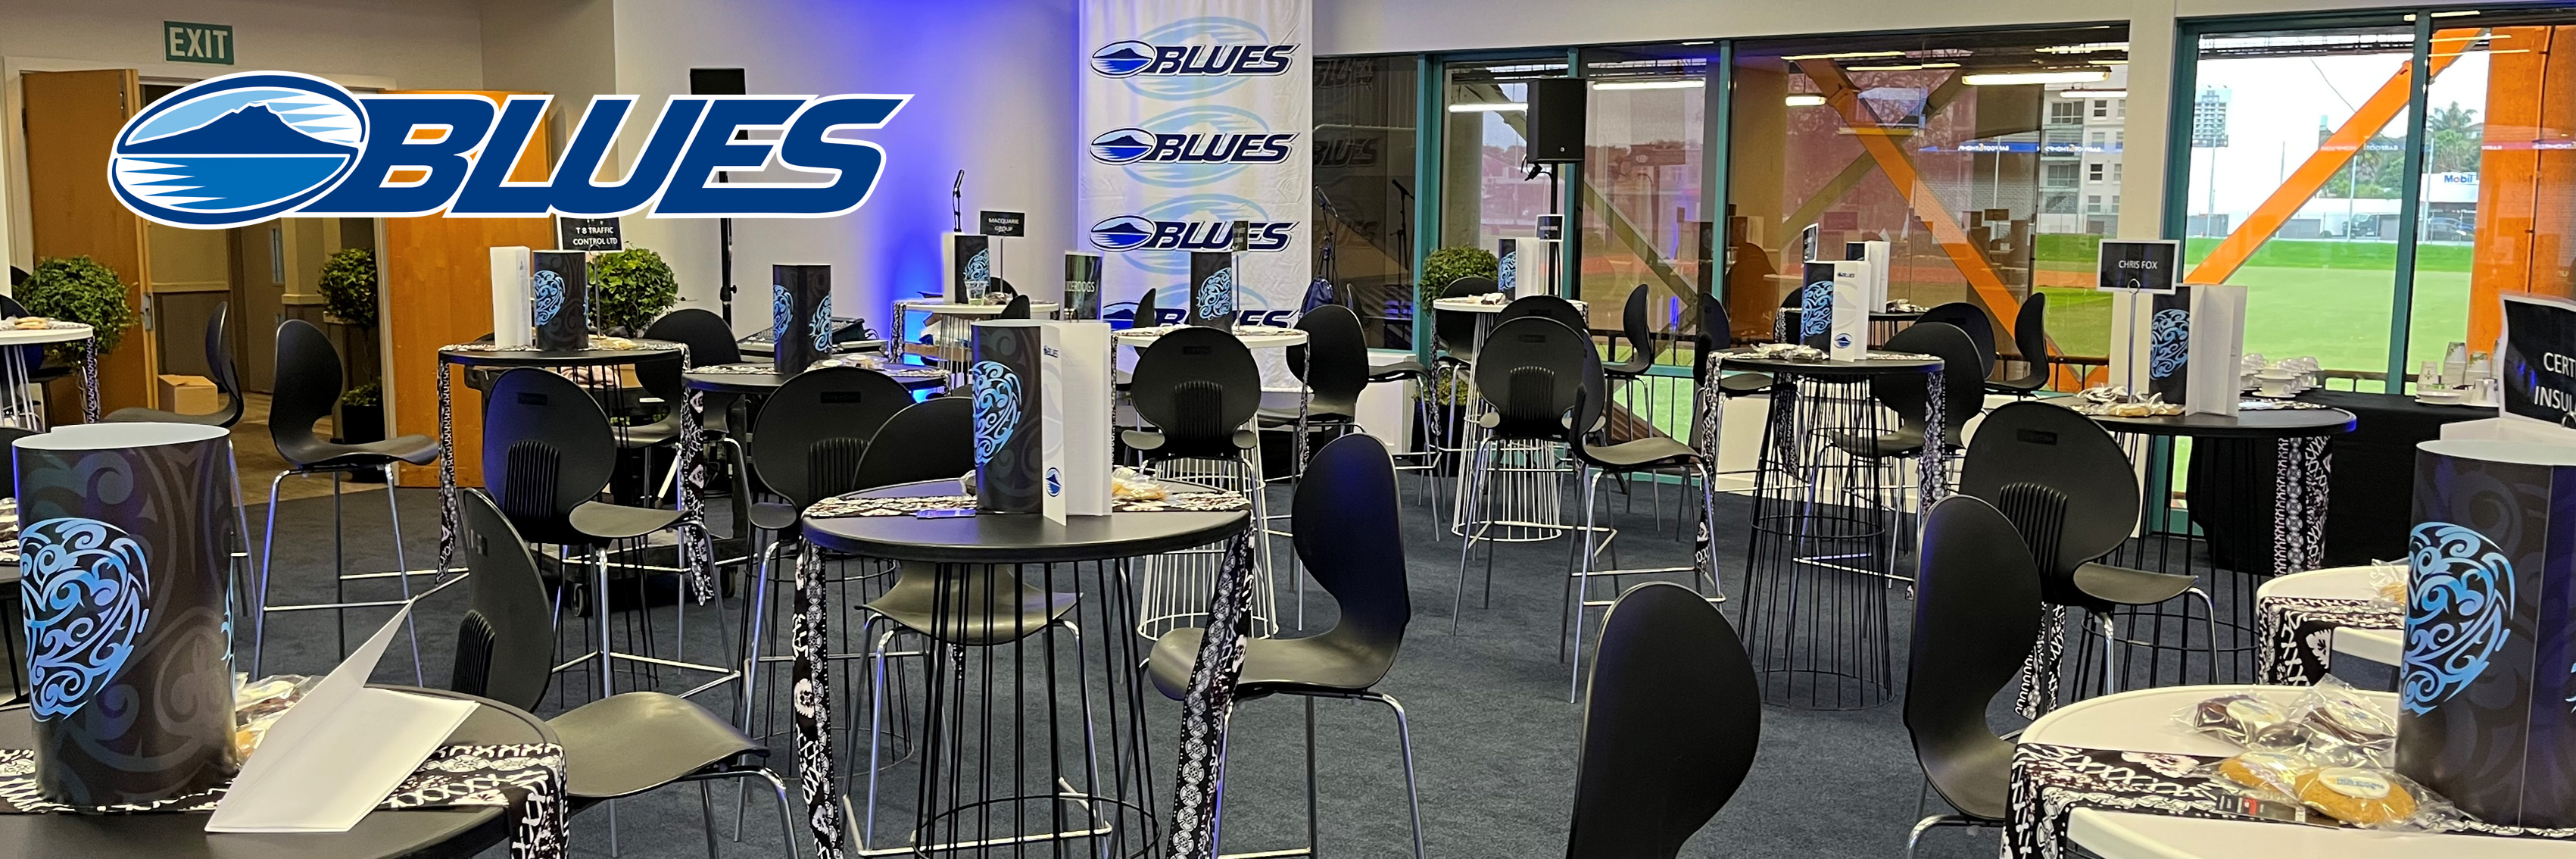 Blues Corporate Business Lounge Banner